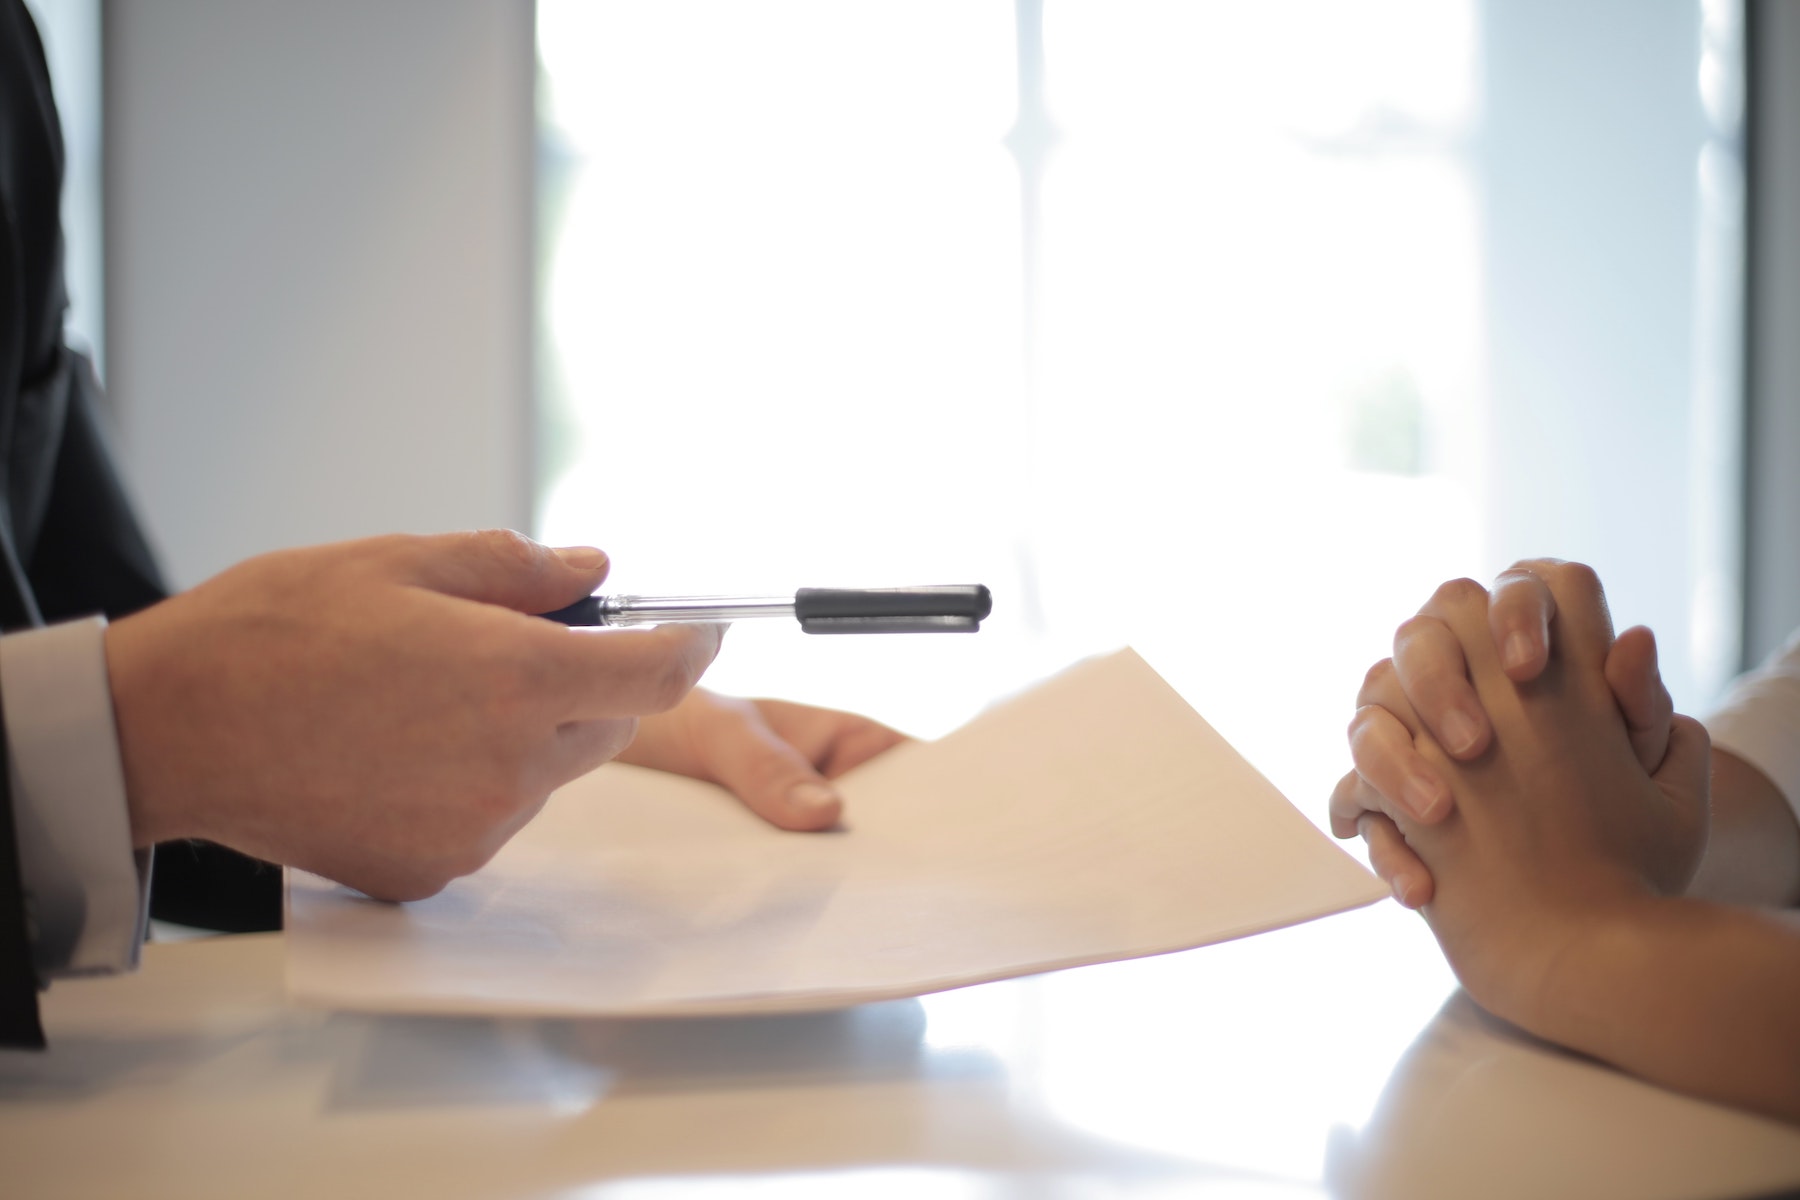 Revoking Or Changing A POA (Power Of Attorney) Agreement